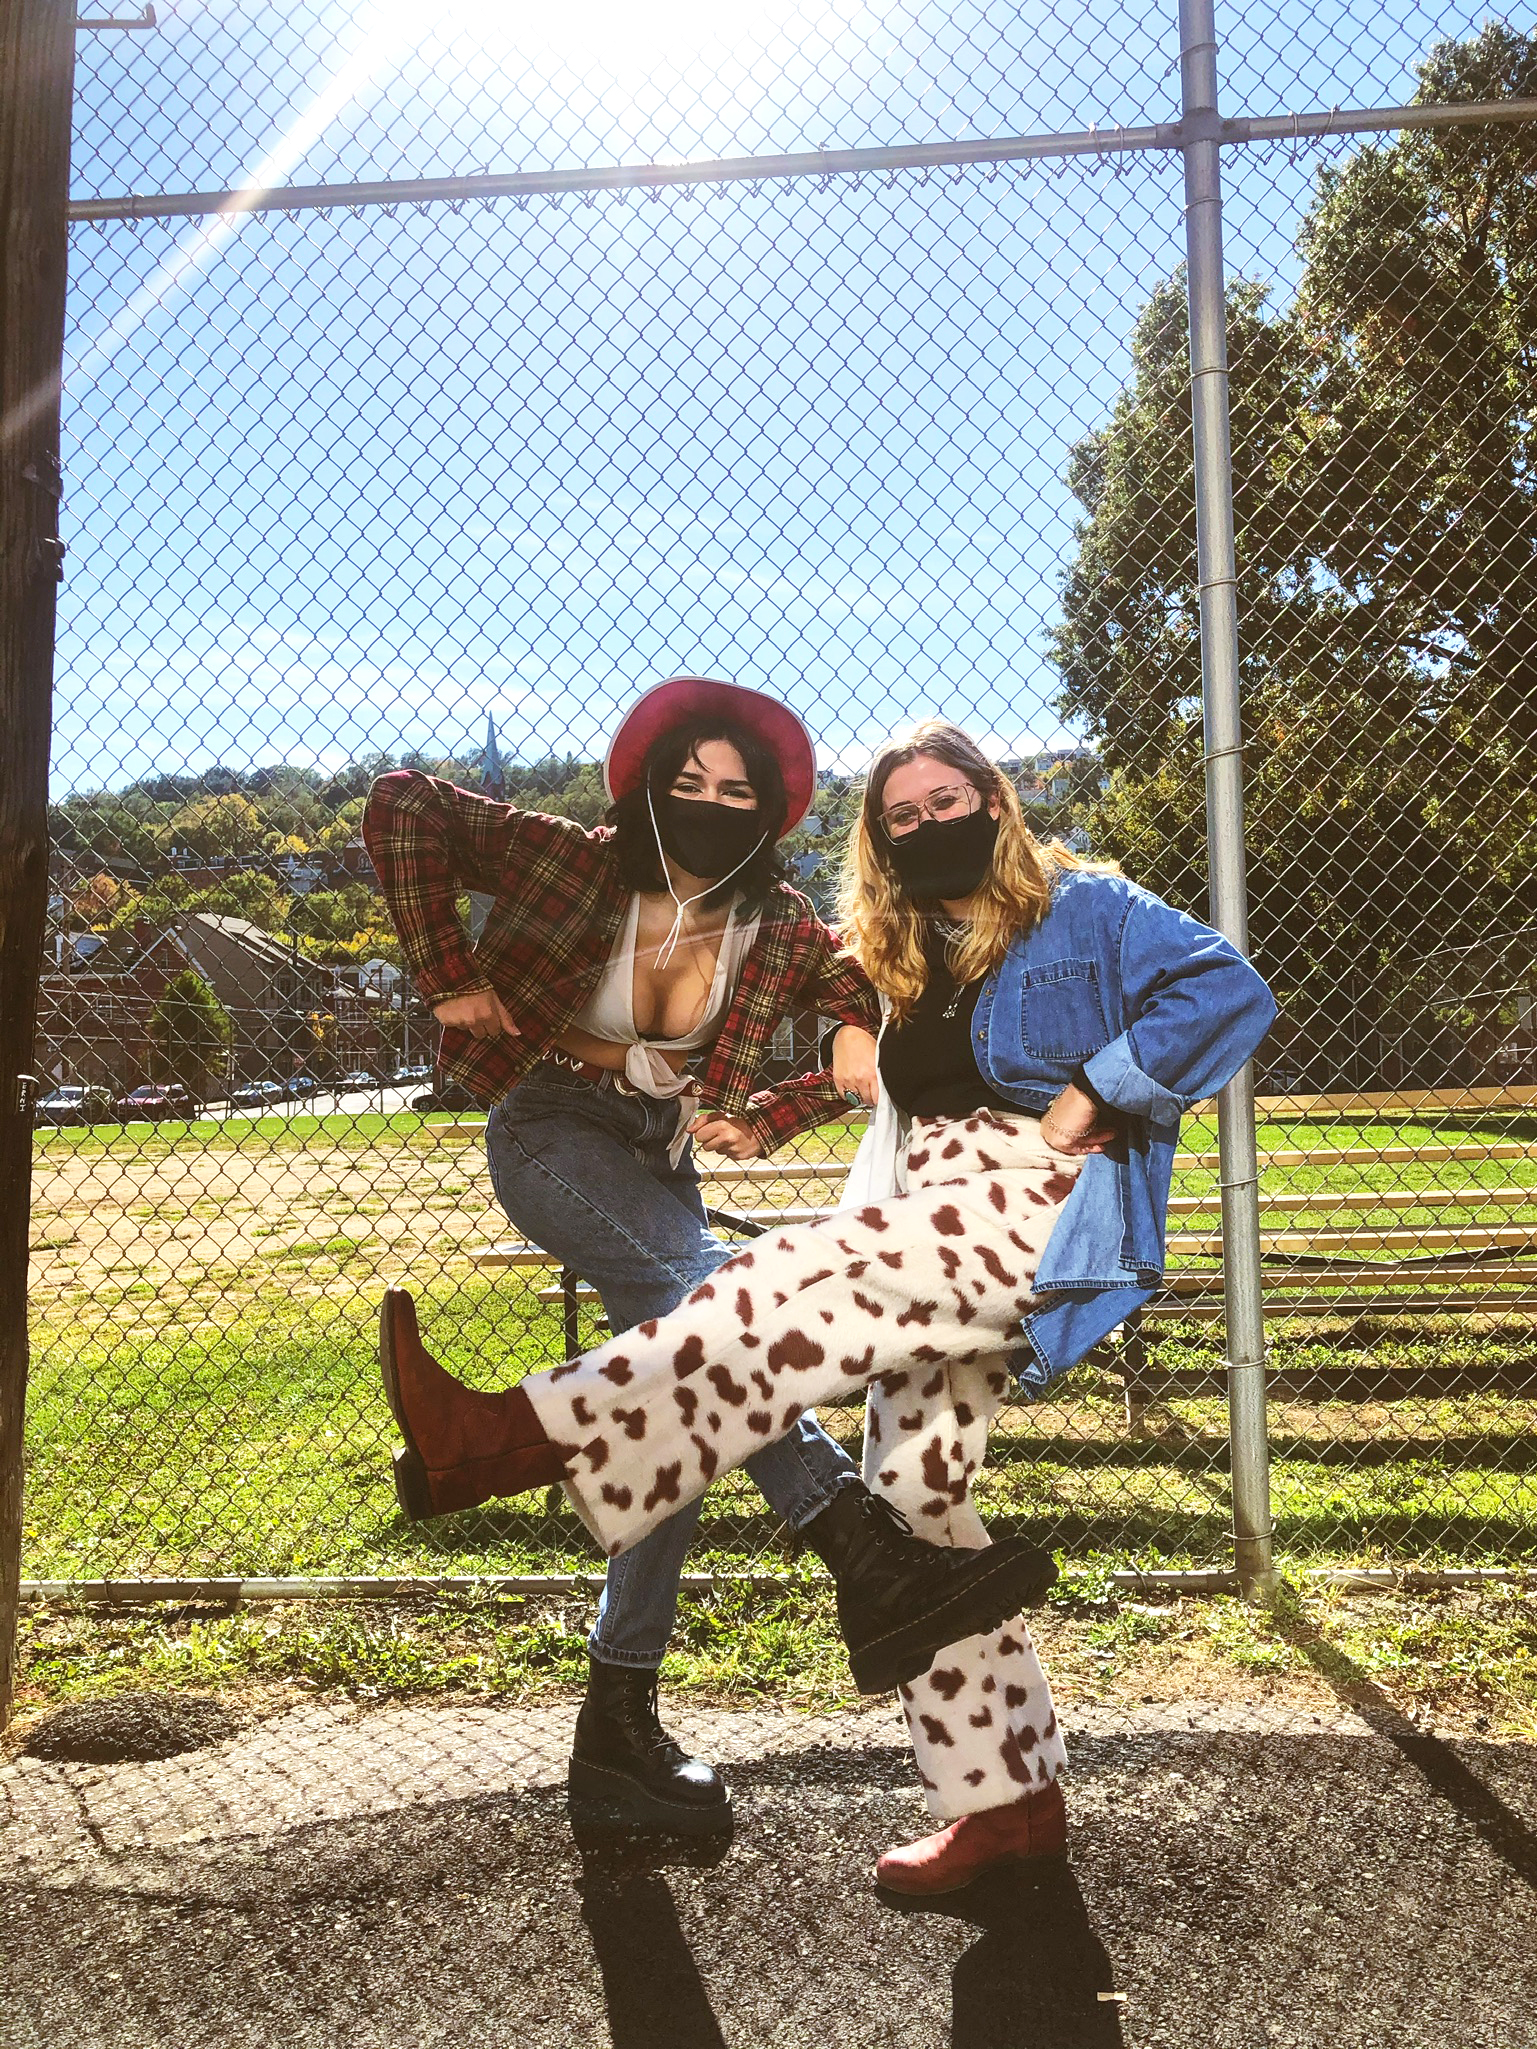 2 women standing in front of chainlink fence / baseball field wearing Western outfits